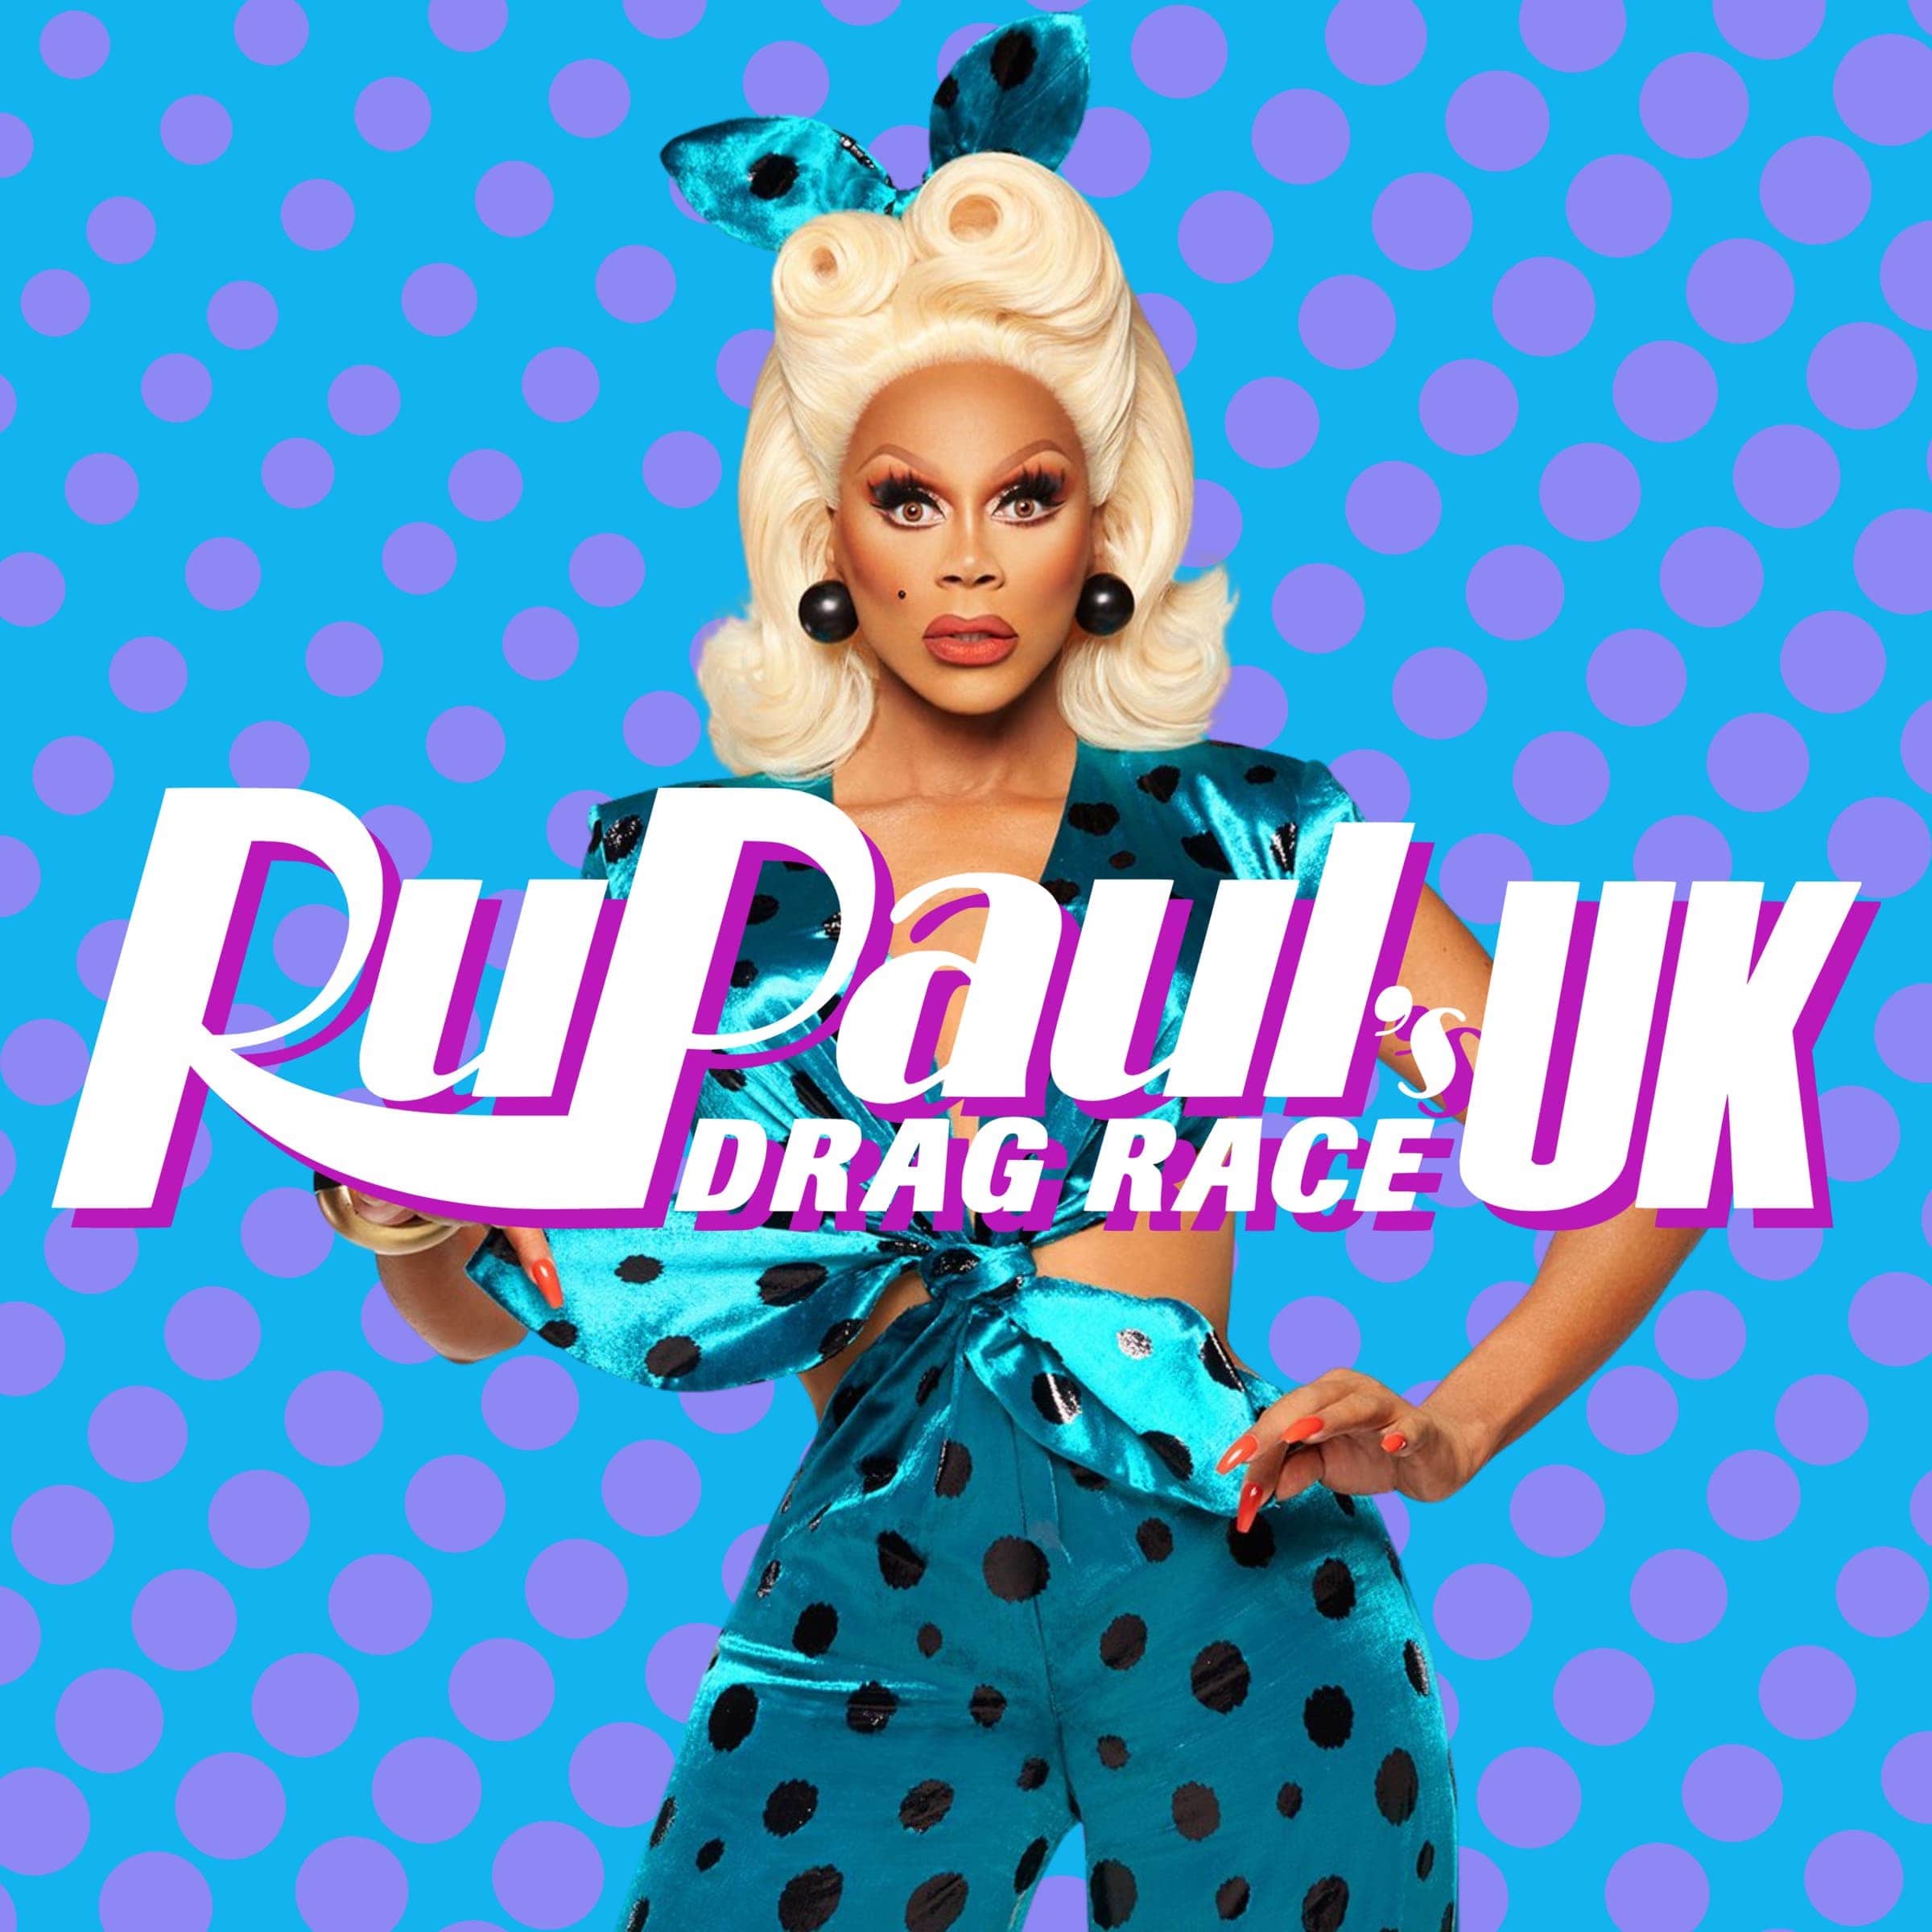 Is it true that season 3 of 'RuPaul's Drag Race UK' was filmed in just 10 days? Check out what really went down behind the scenes of the latest season.